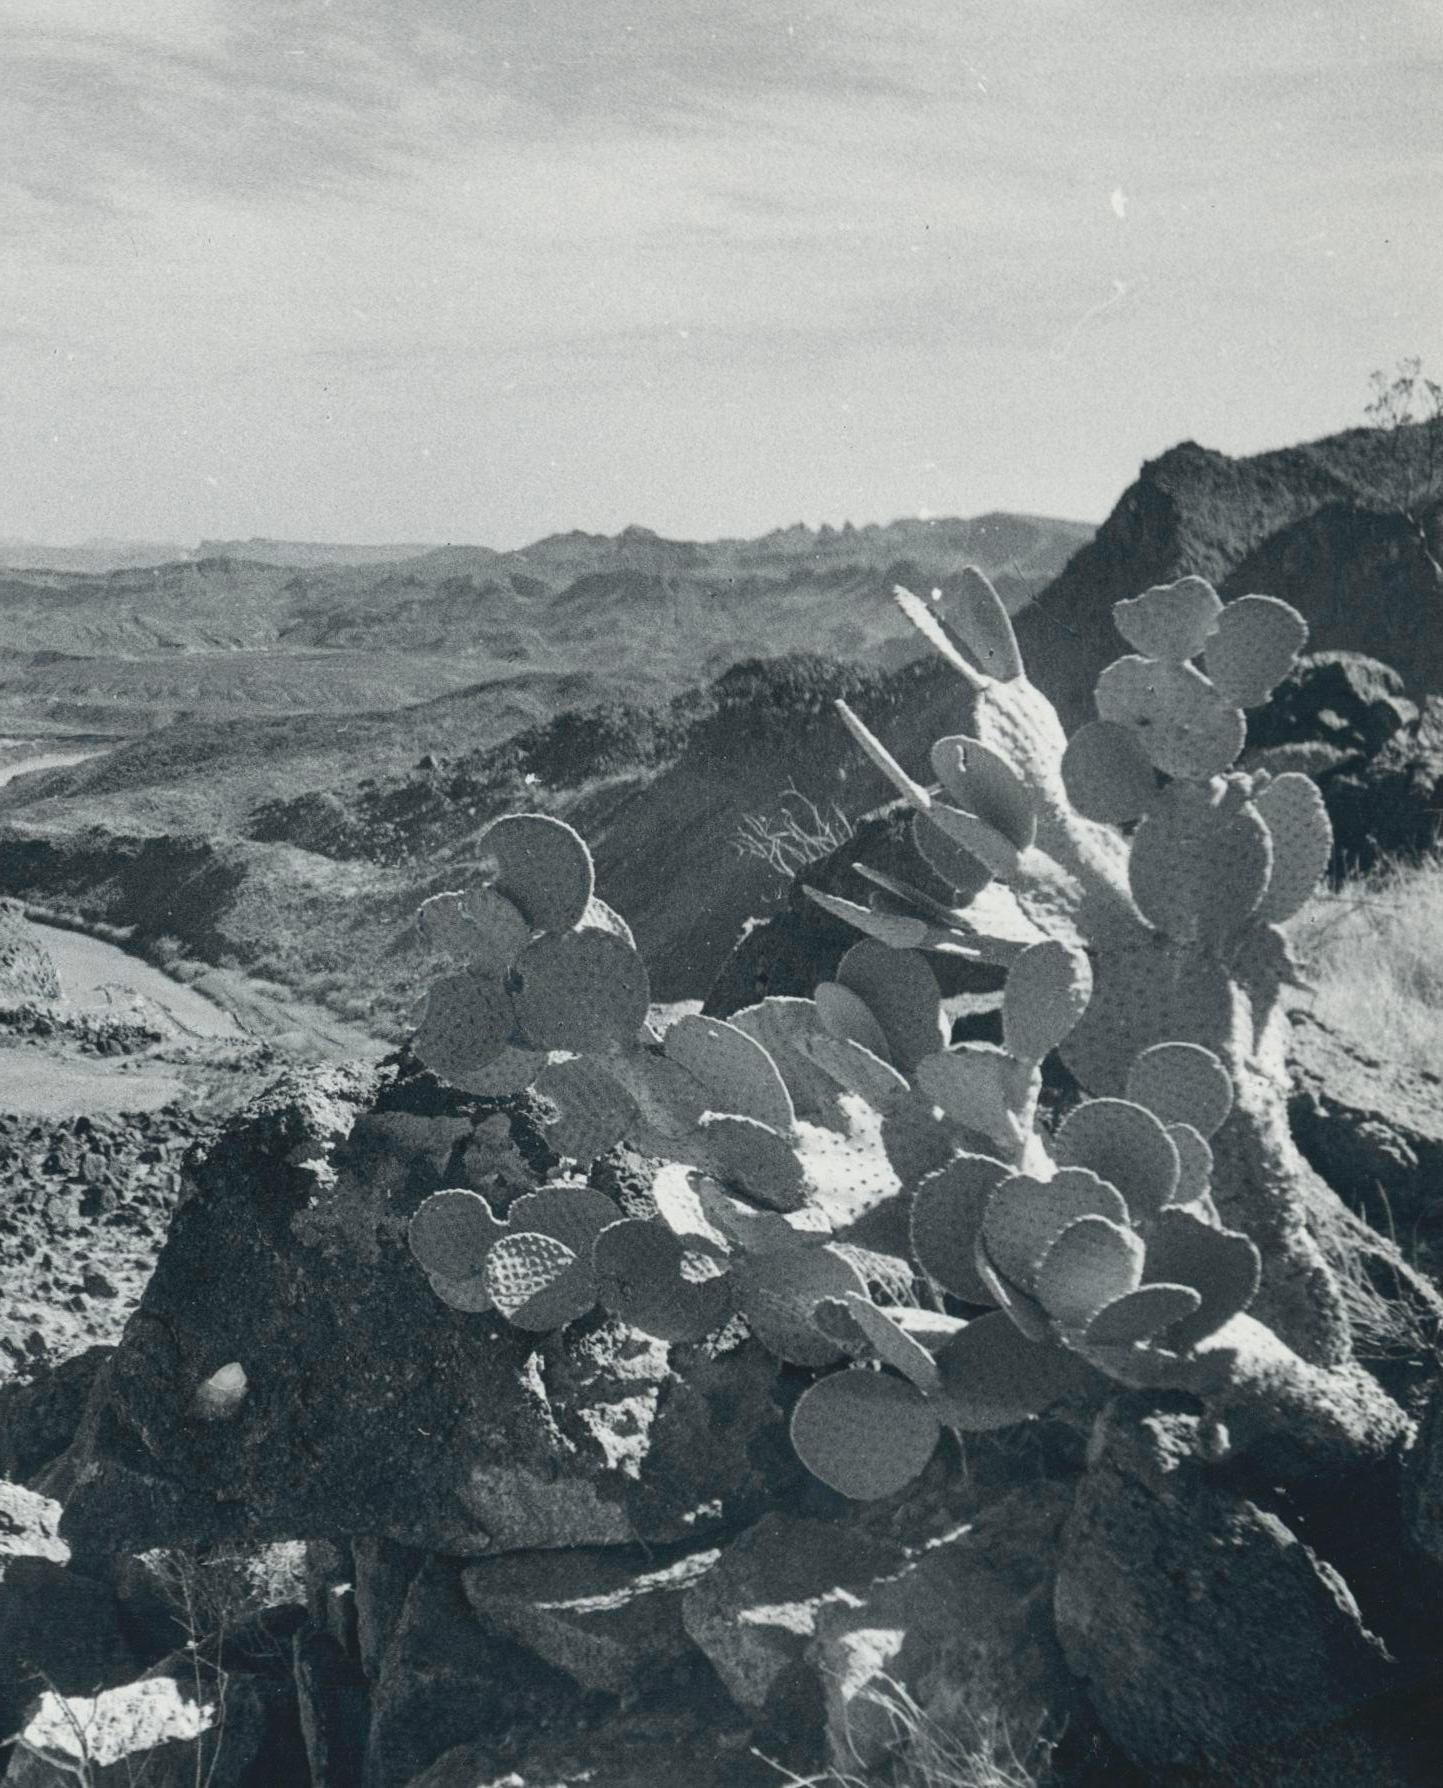 Cacti, Rio Grande, Black and White, USA 1960s, 16, 4 x 23, 1 cm - Photograph by Erich Andres